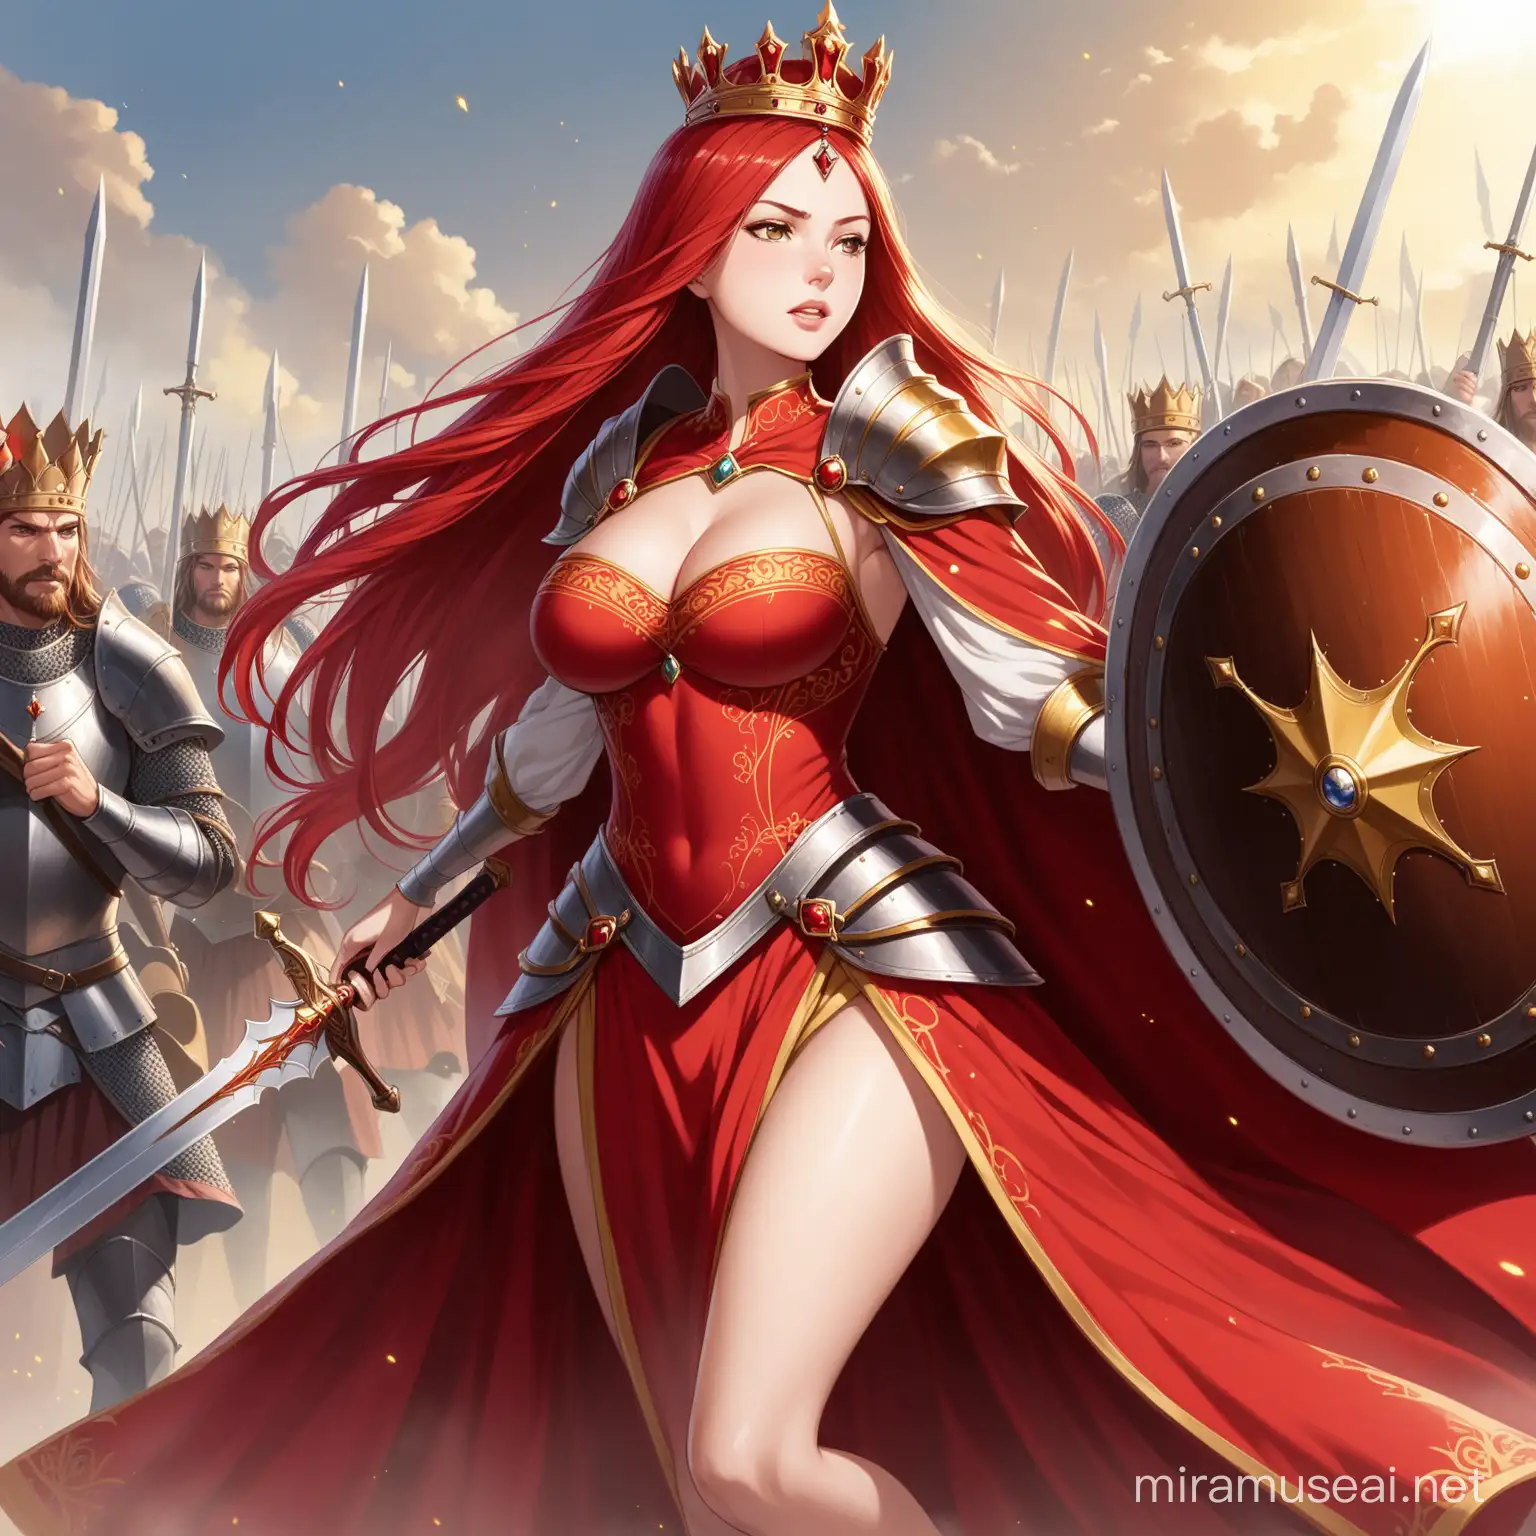 RedHaired Queen in Battle Spanish Crown Warrior Princess Fighting with Sword and Shield